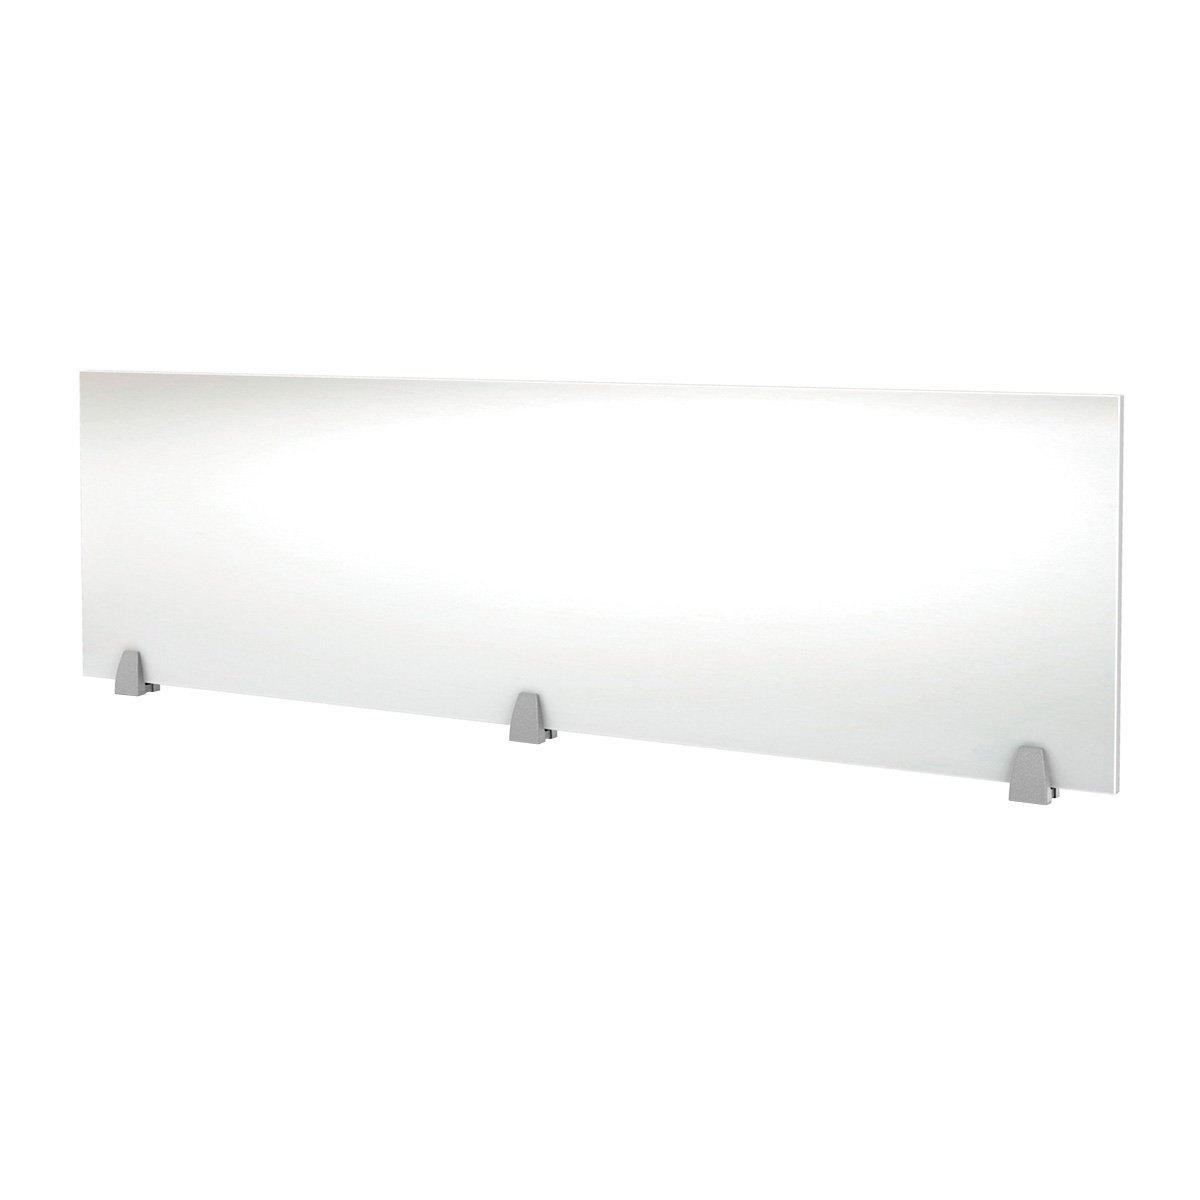 HAT Collective White Board Divider